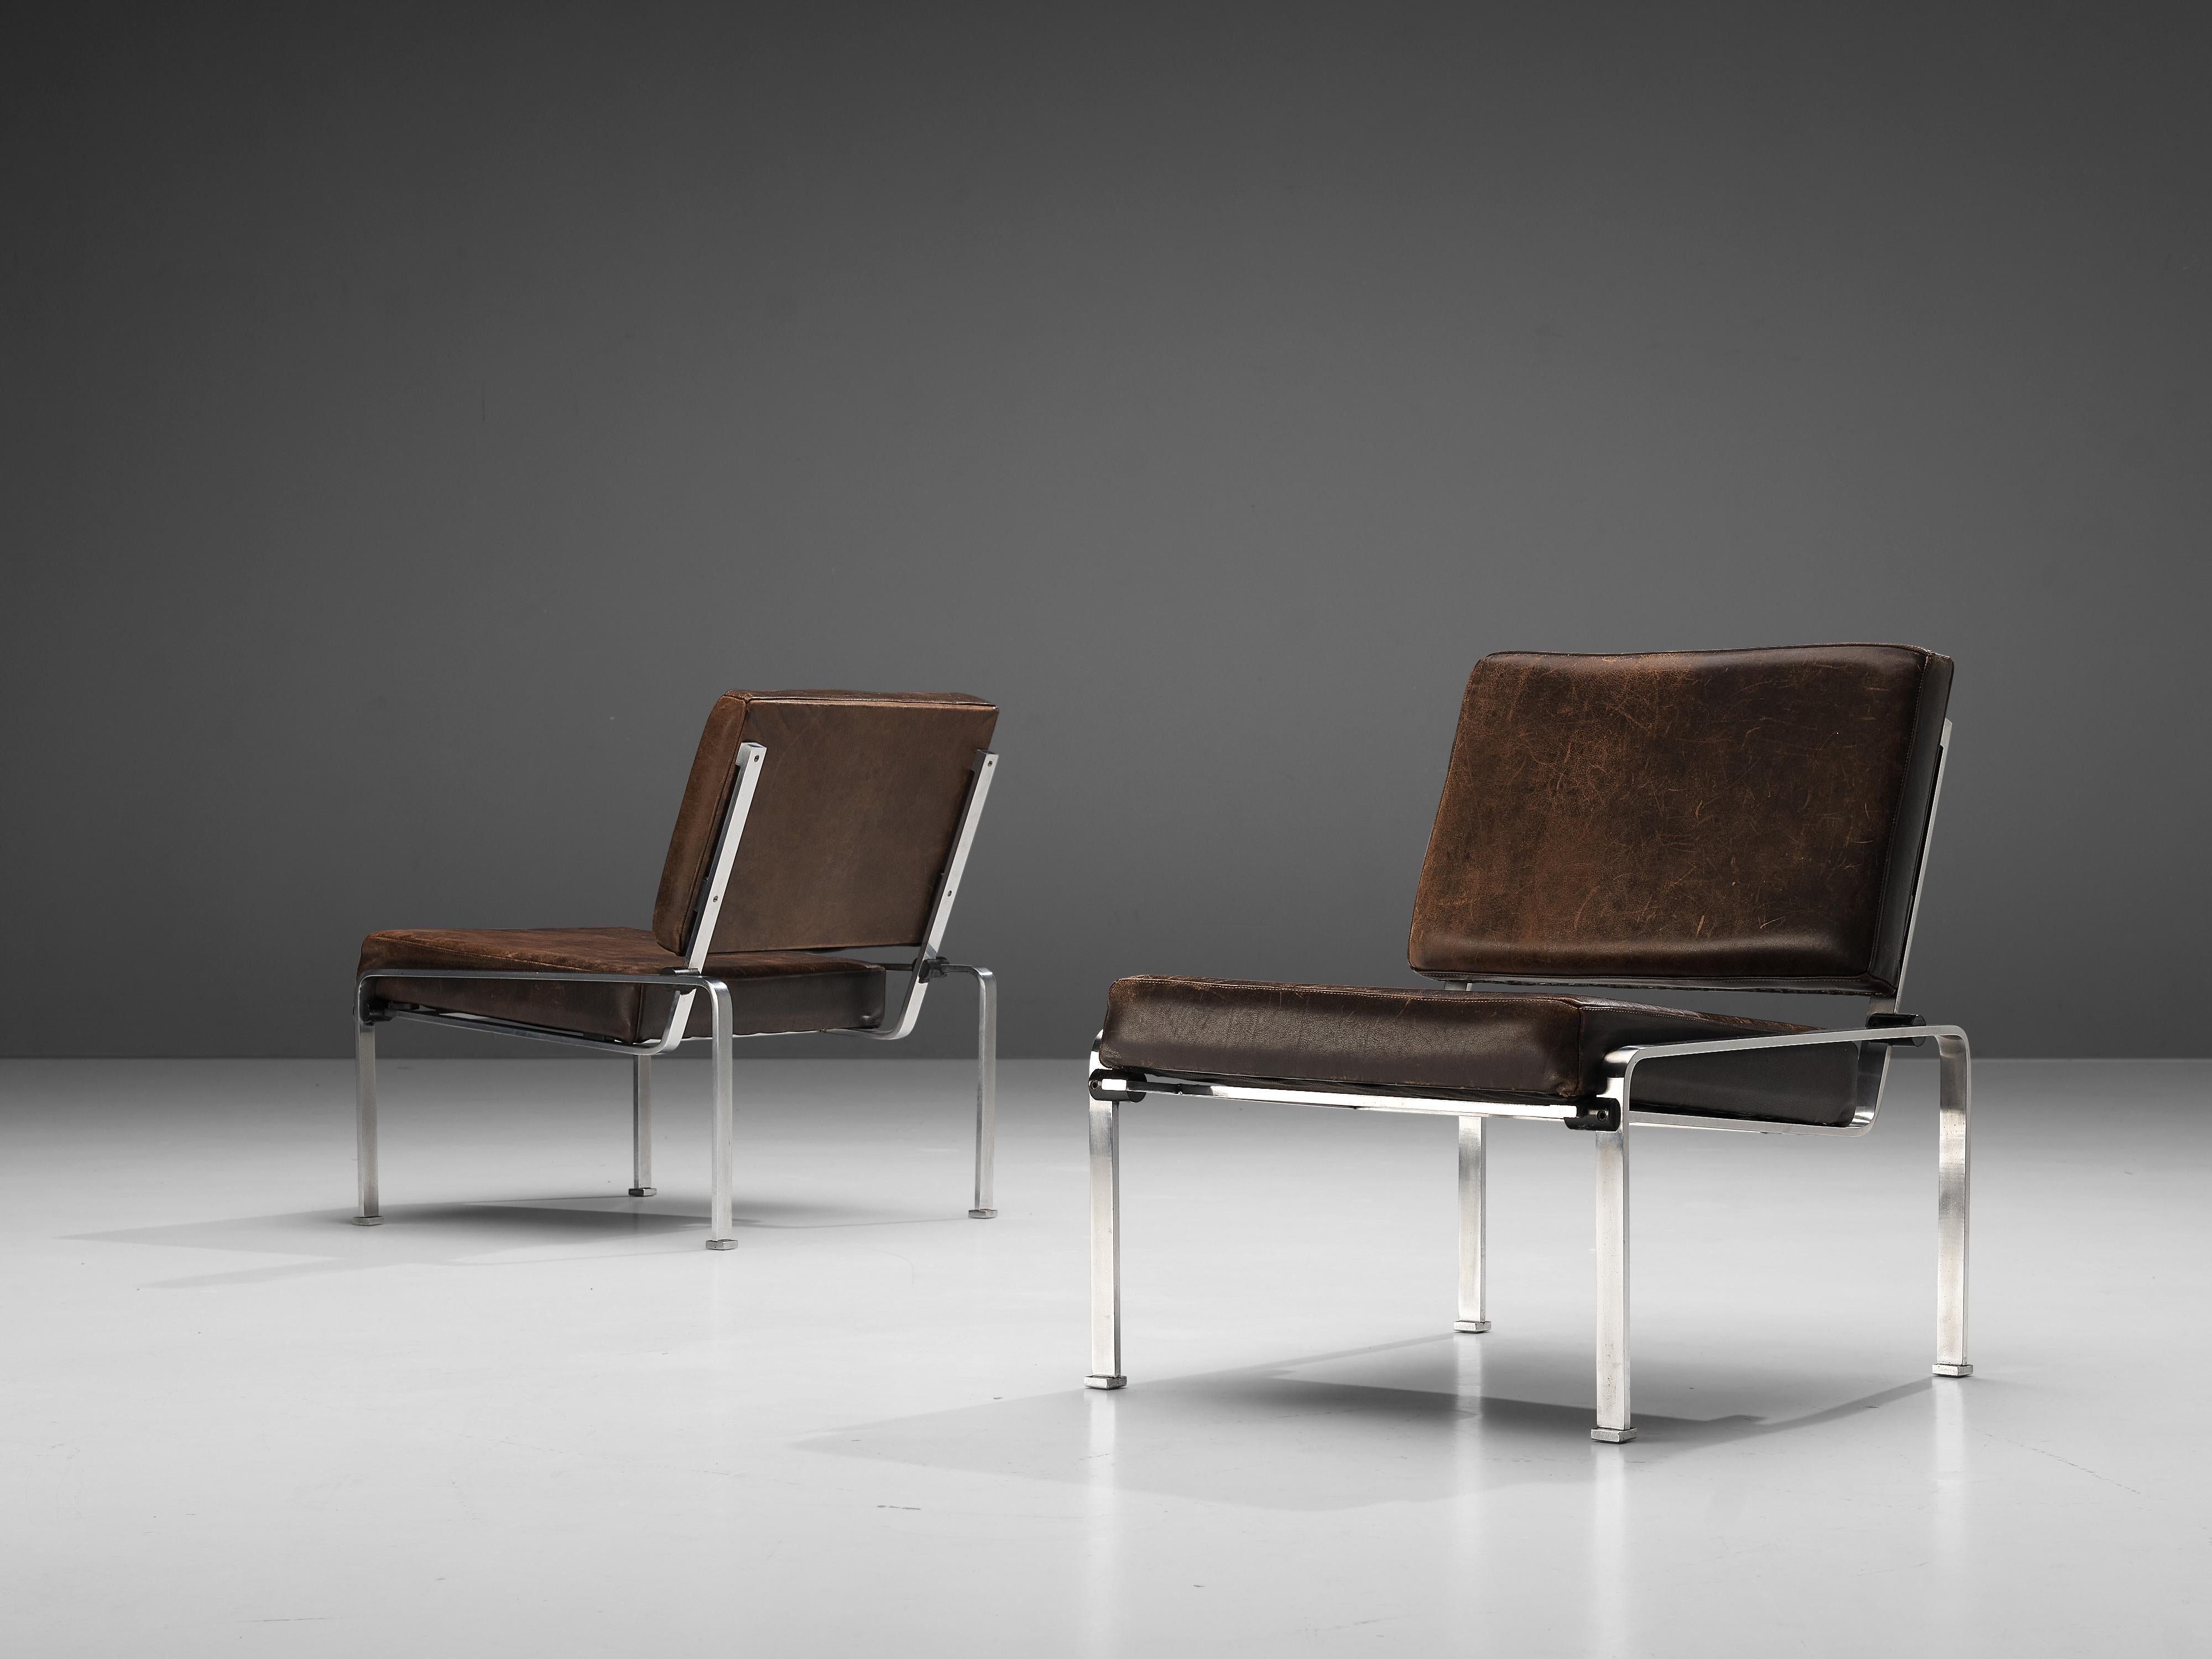 Lounge chairs, leather, chromed metal, Europe, 1960s

The striking patina on the brown leather of these lounge chairs combines wonderful with the chromed frame. Due to the thin frame and the honest, open construction the chairs have an airy look